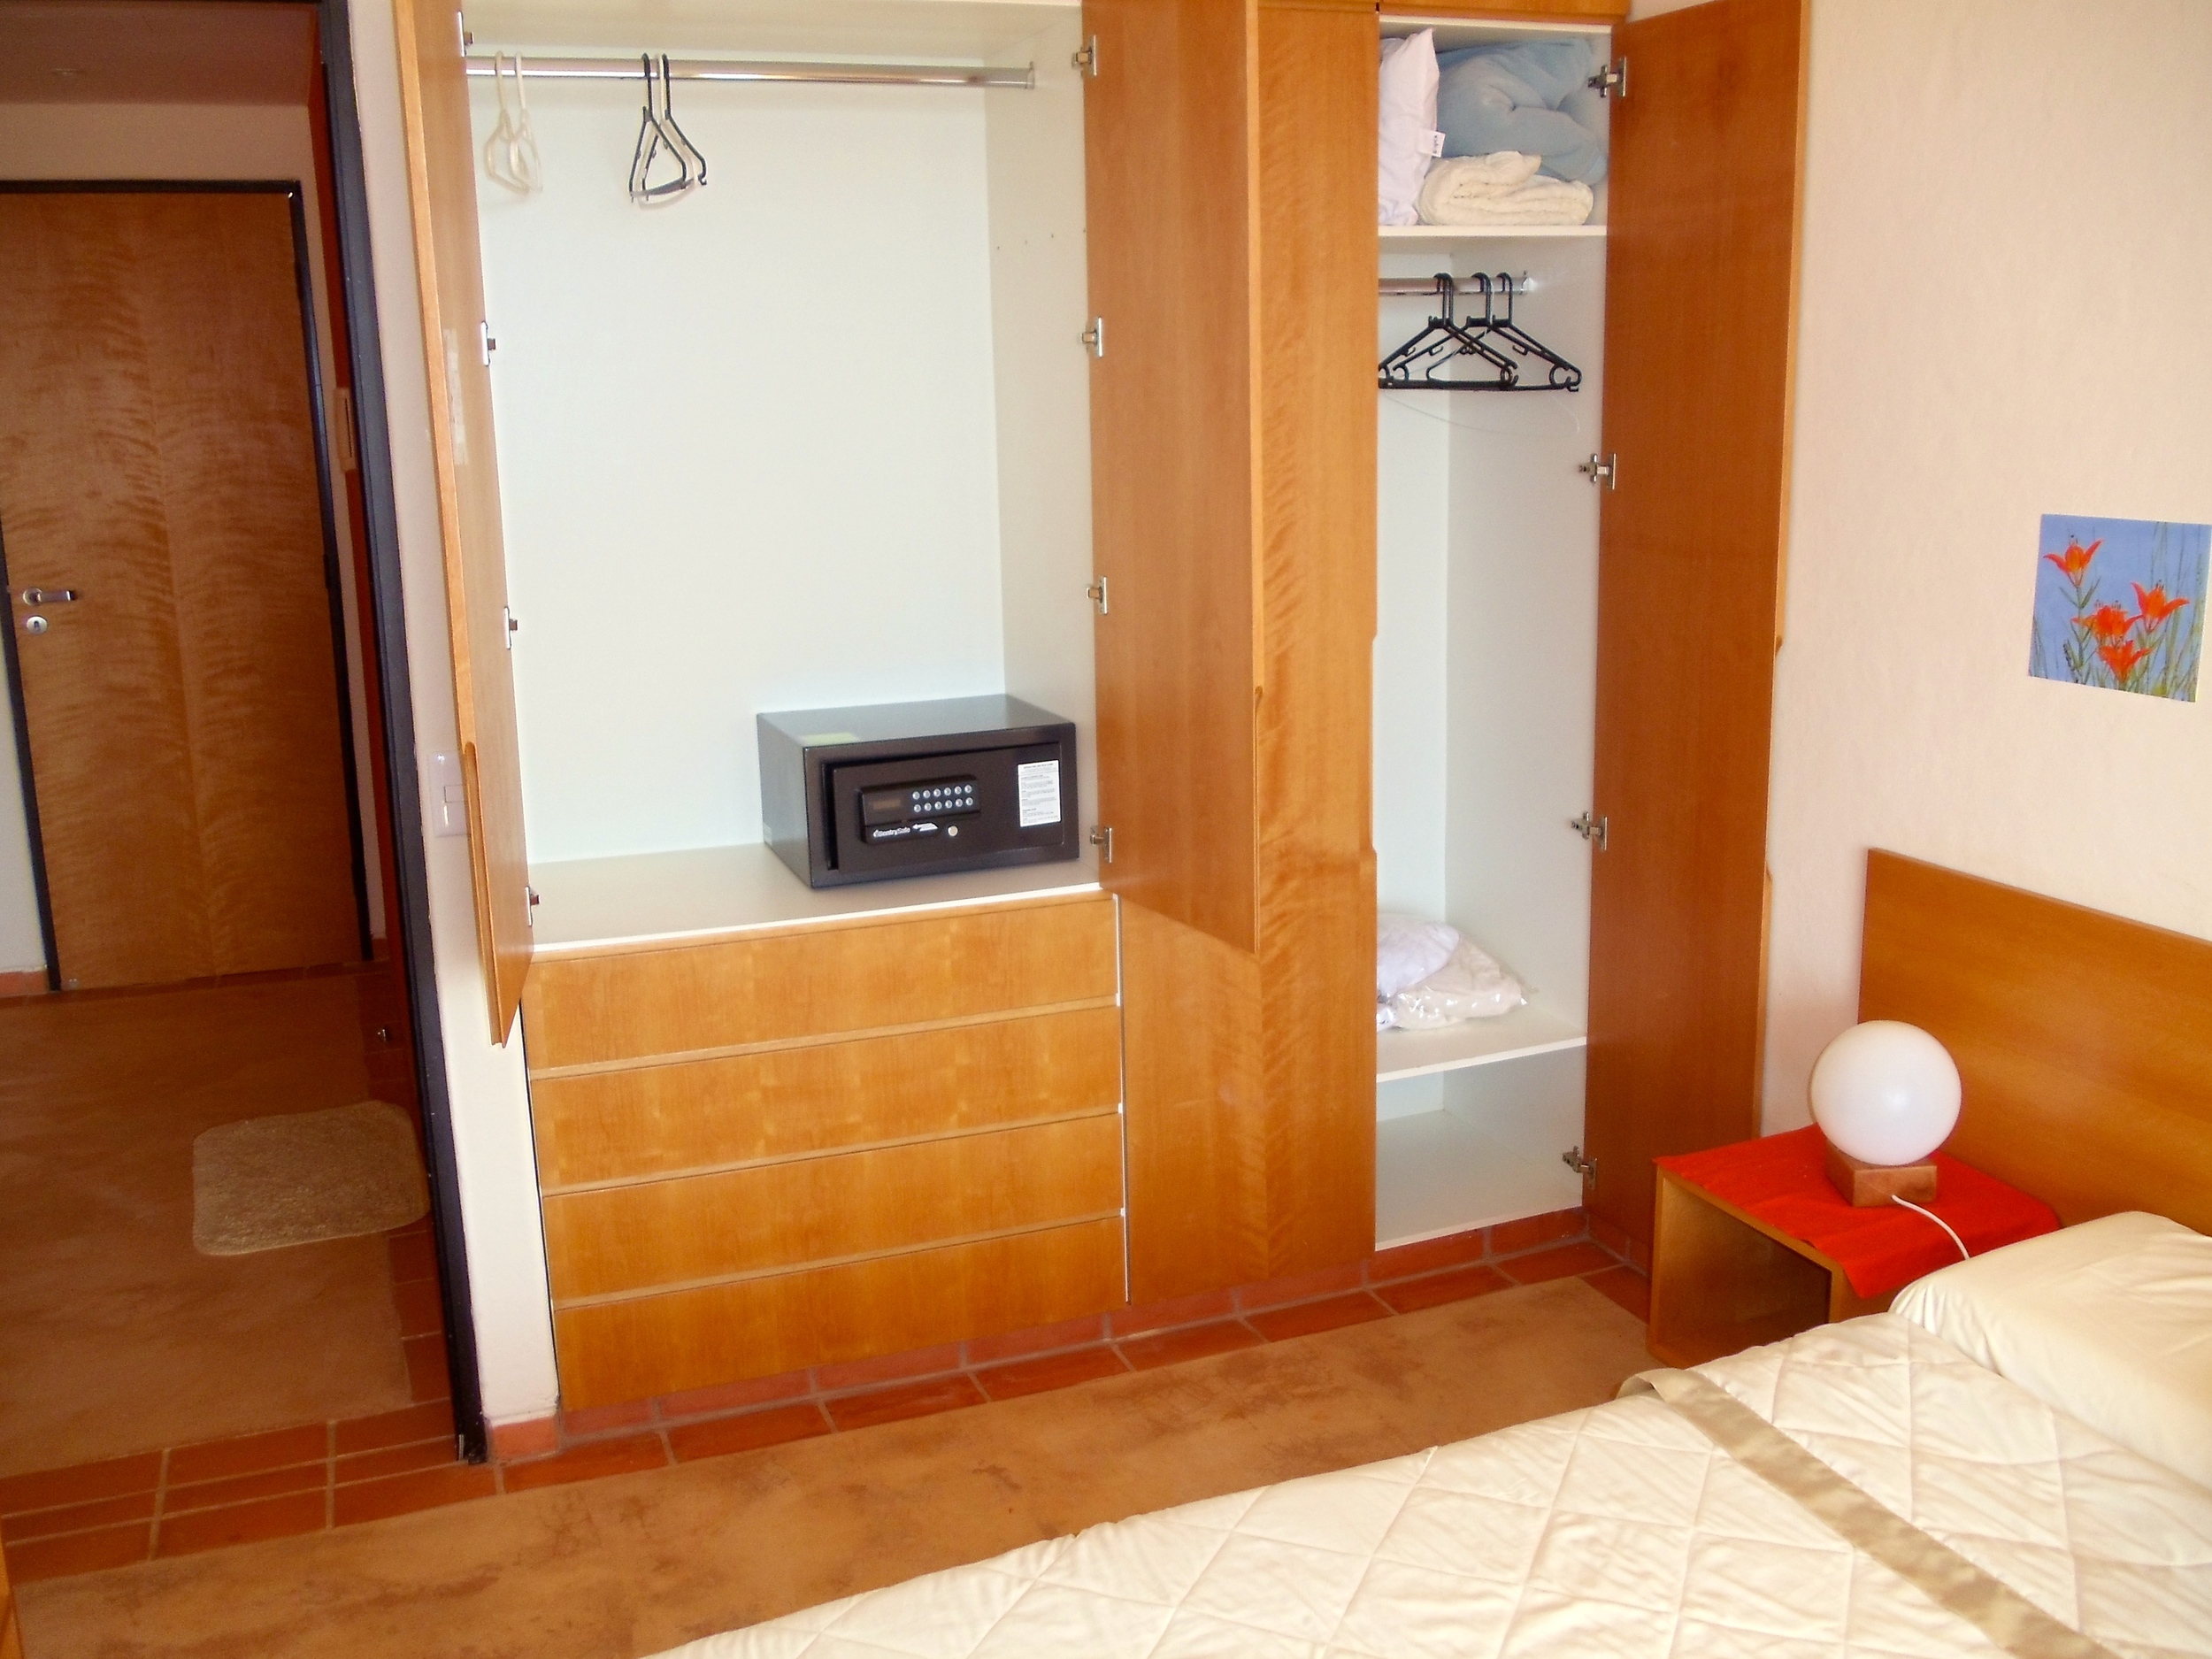 Alegria - bedroom closet with safety box